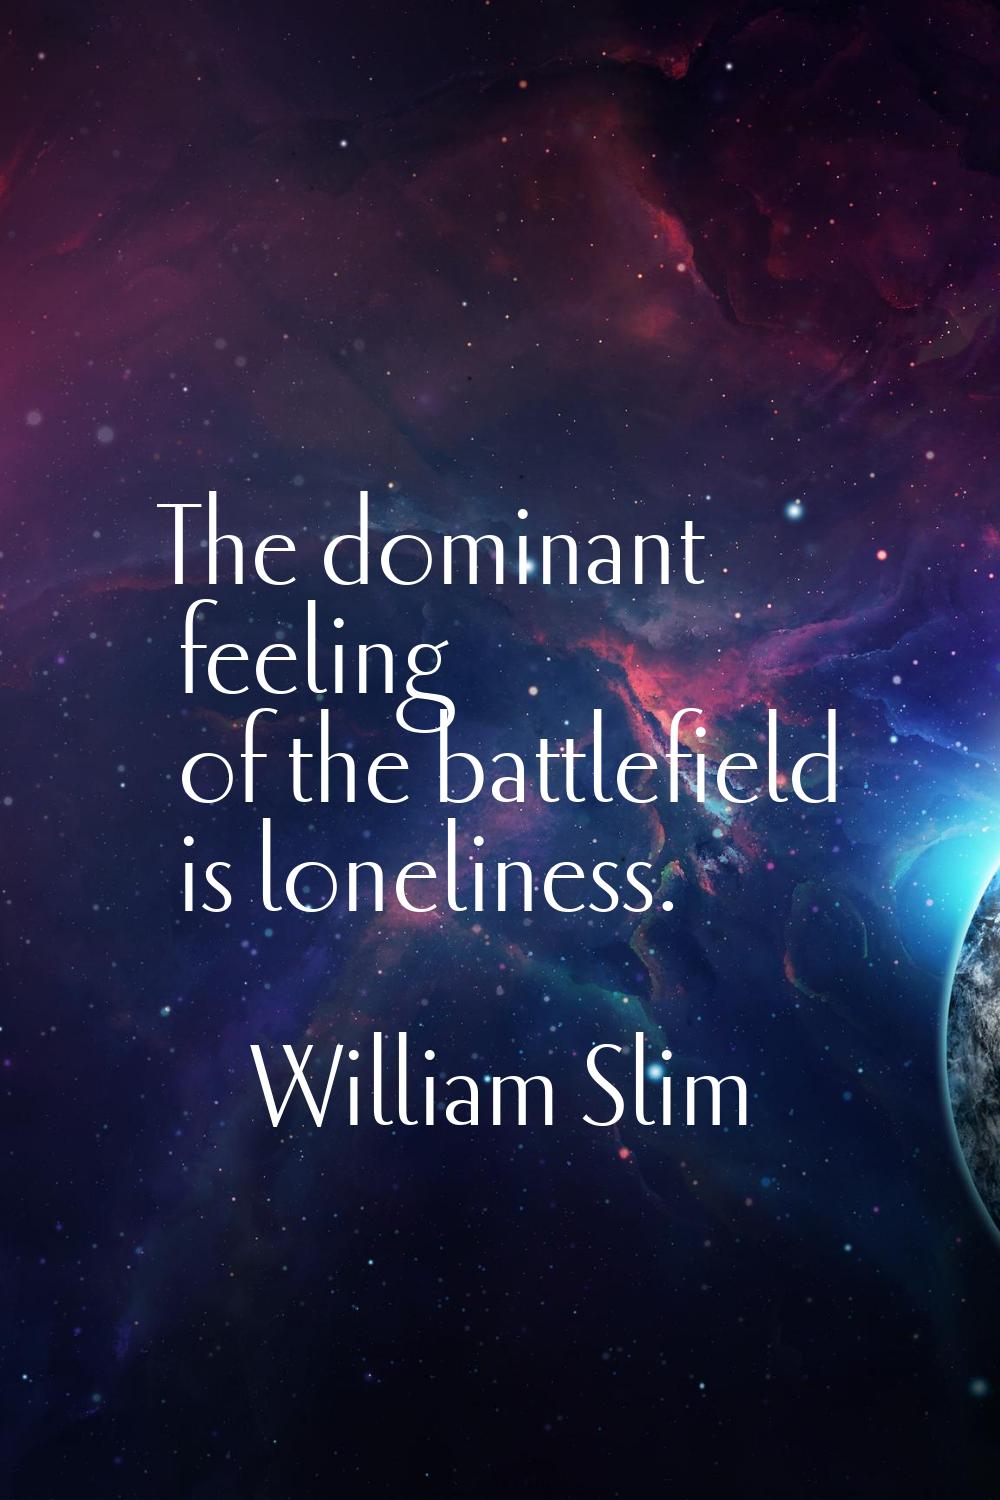 The dominant feeling of the battlefield is loneliness.